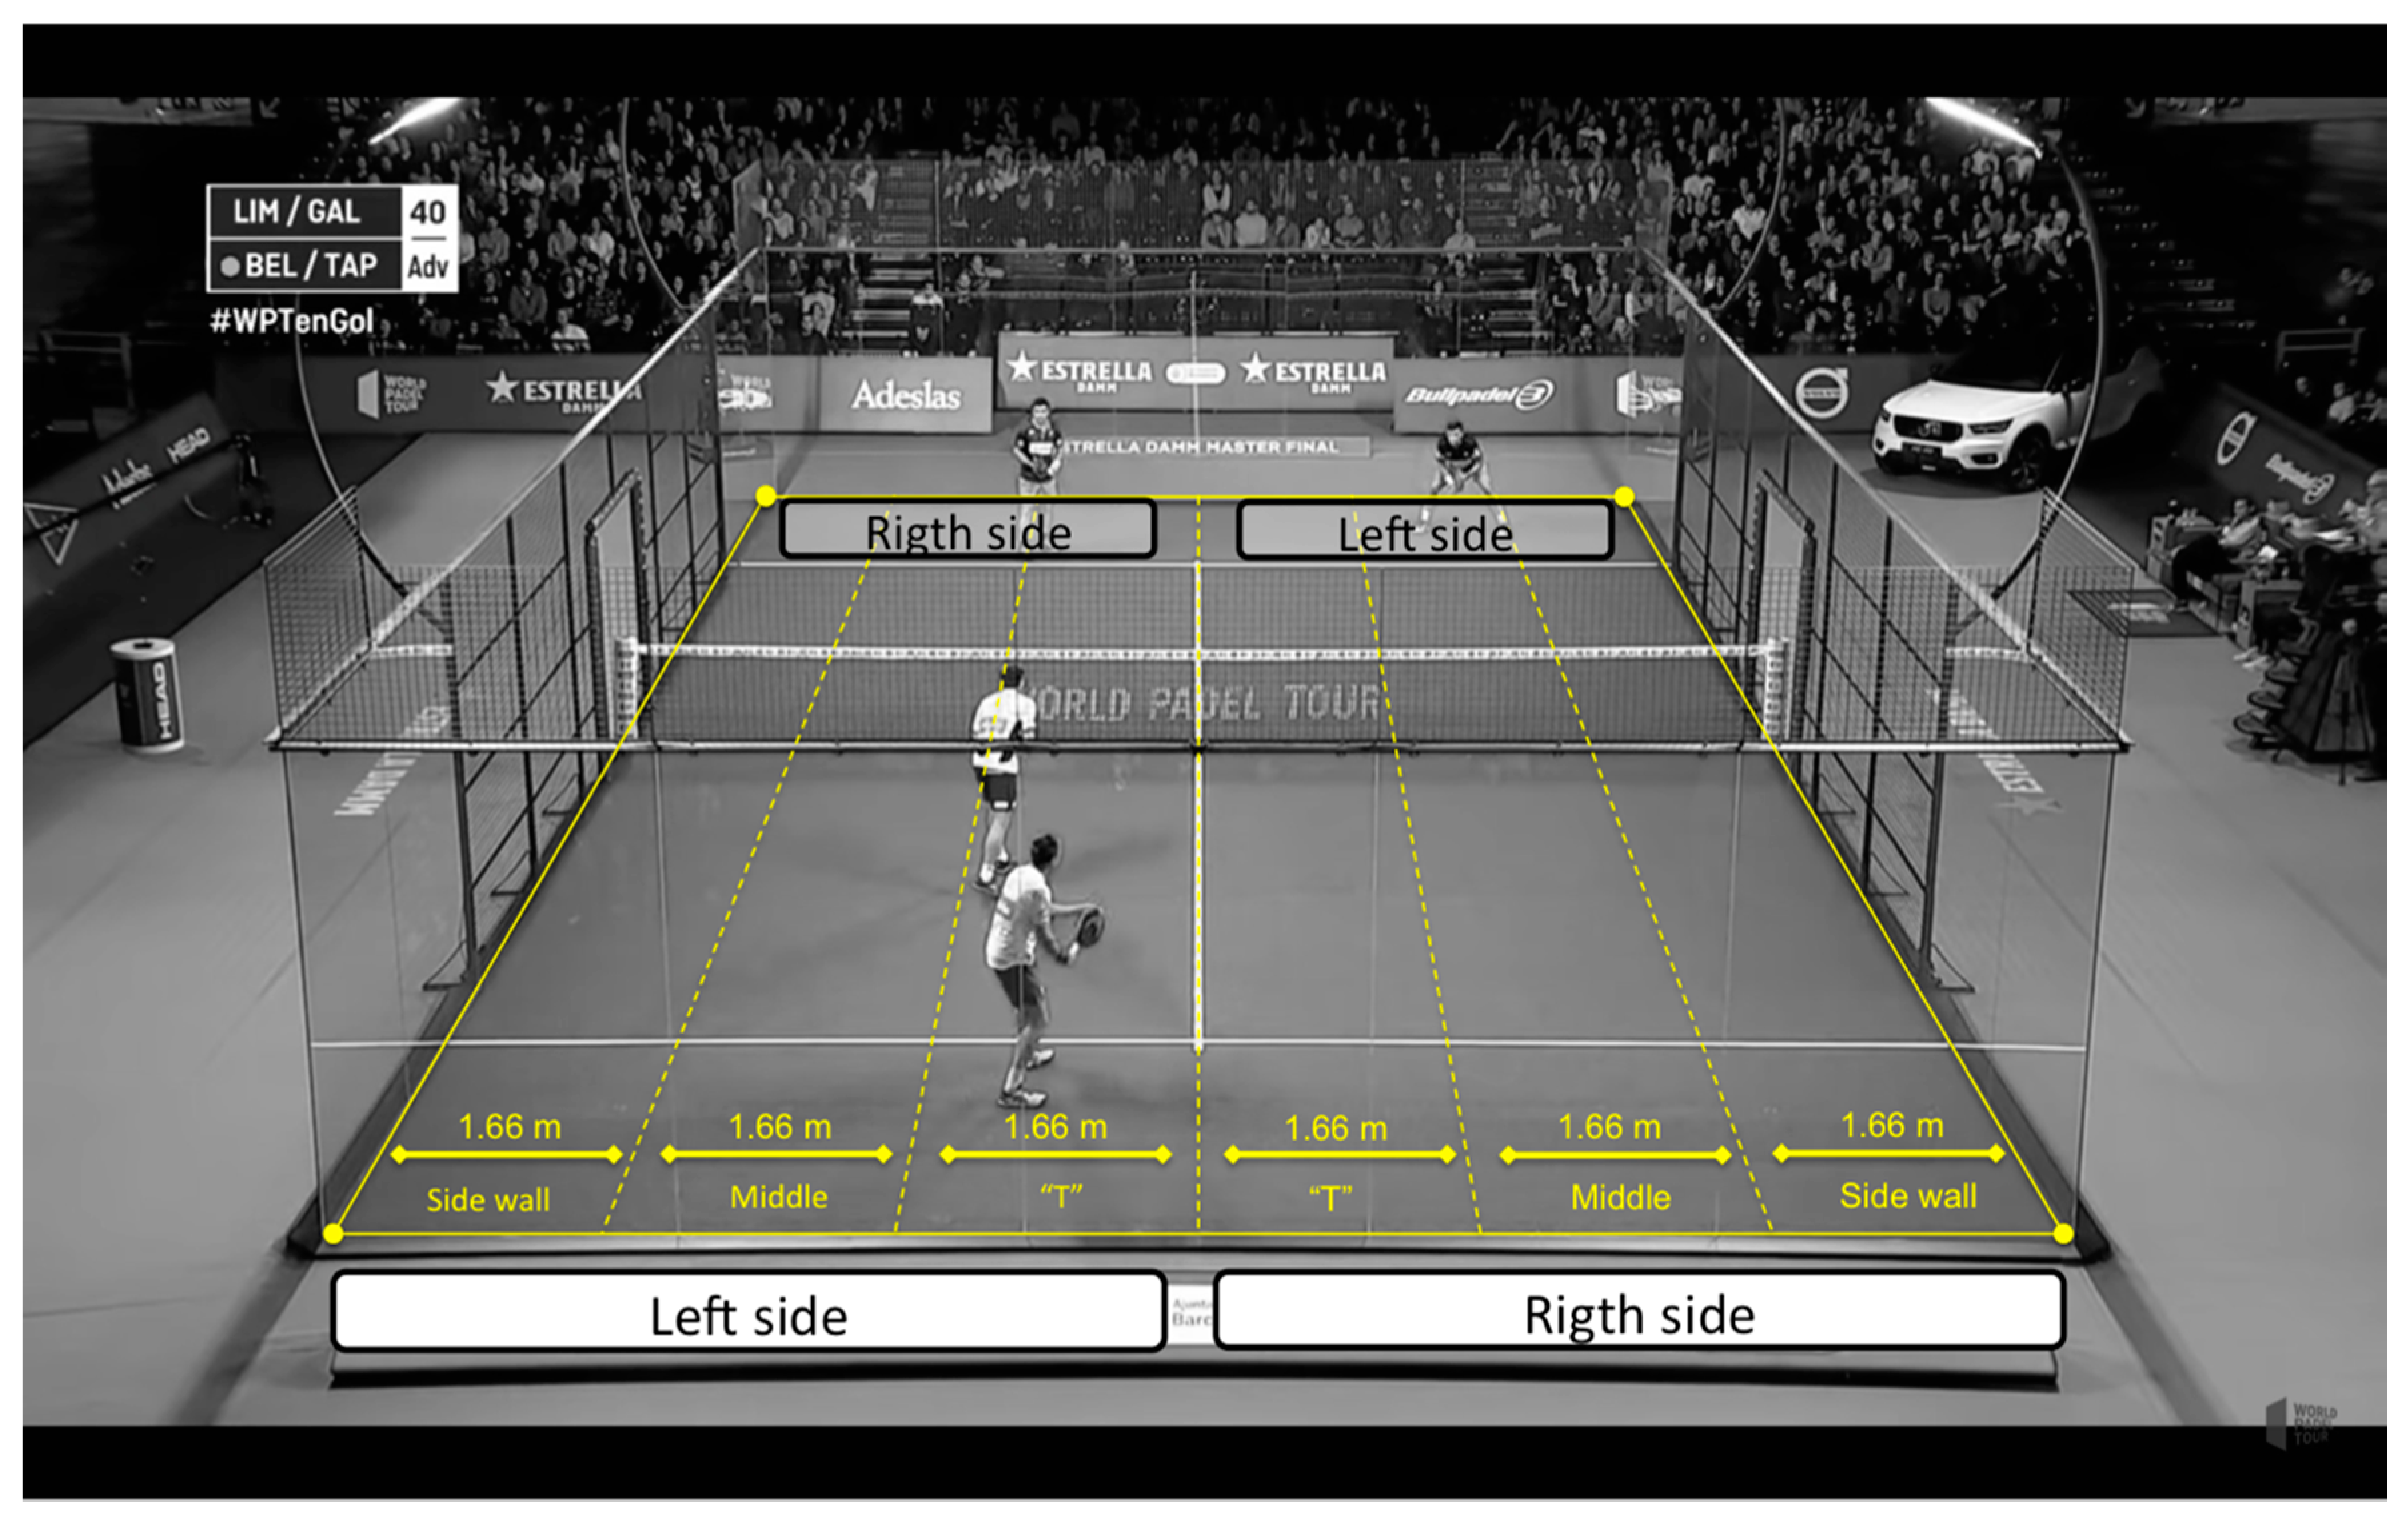 Applied Sciences | Free Full-Text | Analysis of Serve and Serve-Return  Strategies in Elite Male and Female Padel